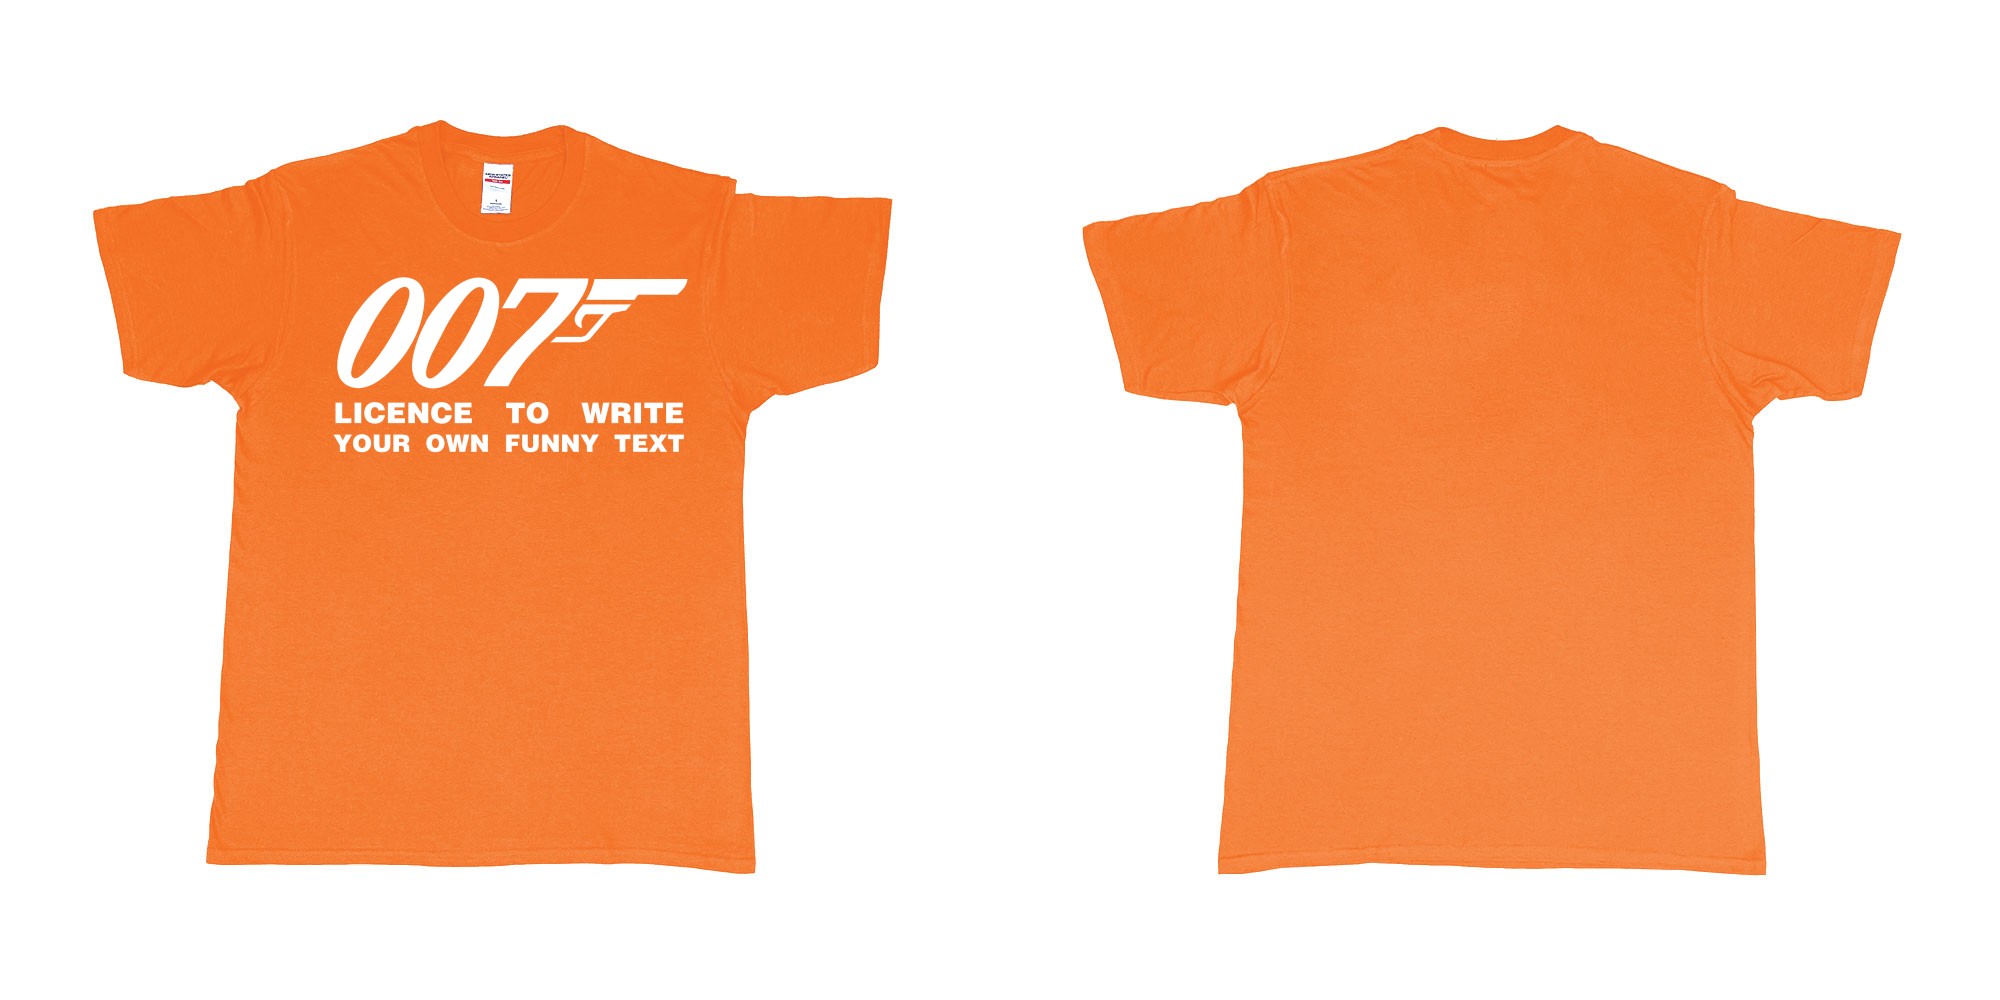 Custom tshirt design james bond logo licence to write own custom text print in fabric color orange choice your own text made in Bali by The Pirate Way